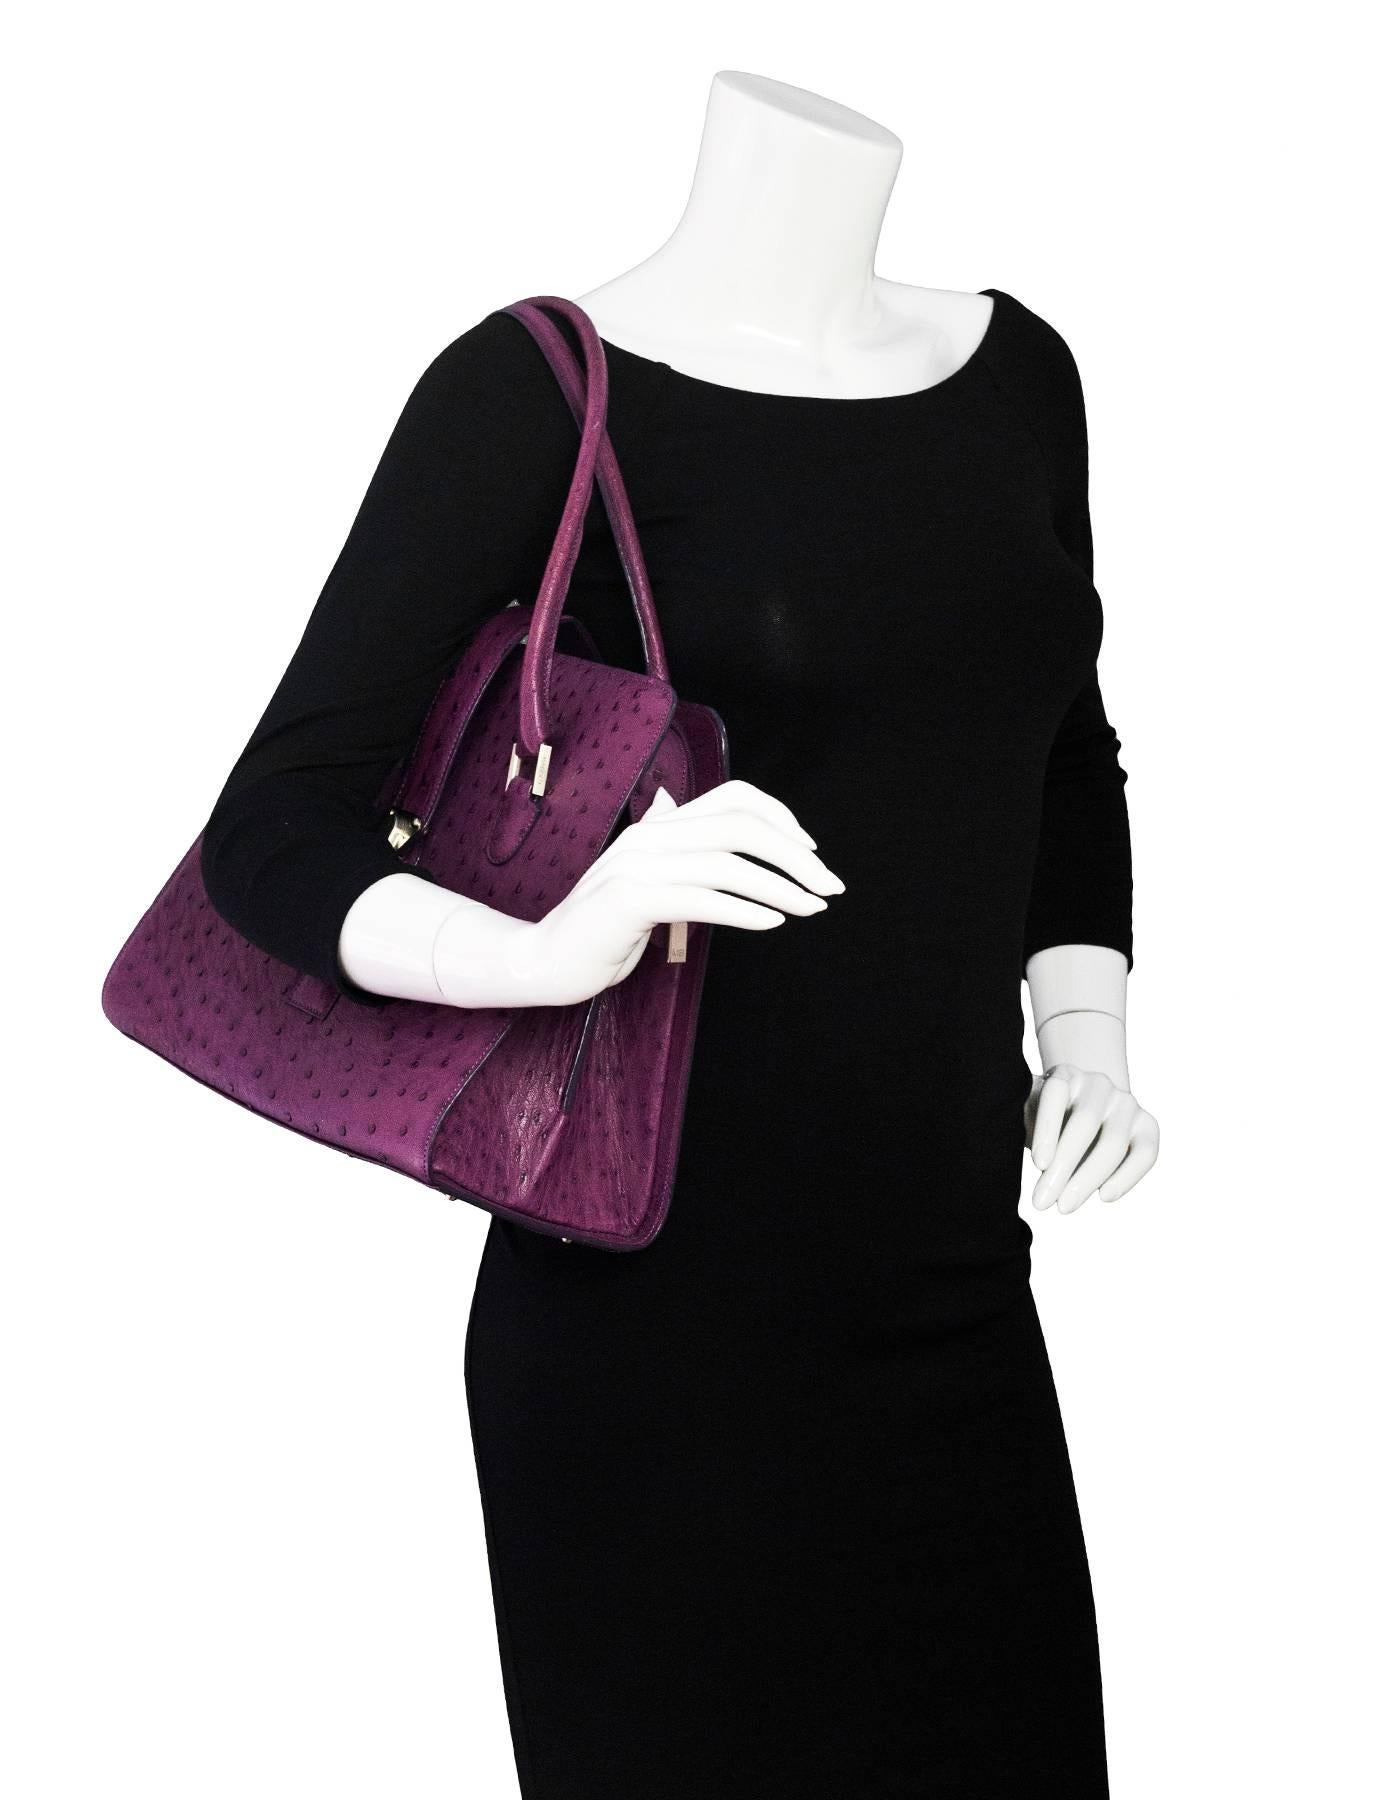 Manolo Blahnik Purple Purple Ostrich Tote

Color: Purple
Materials: Ostrich leather, metal
Lining: Olive green textile
Closure/Opening: Zip top closure with center strap and buckle
Exterior Pockets: None
Interior Pockets: Two patch pockets, small